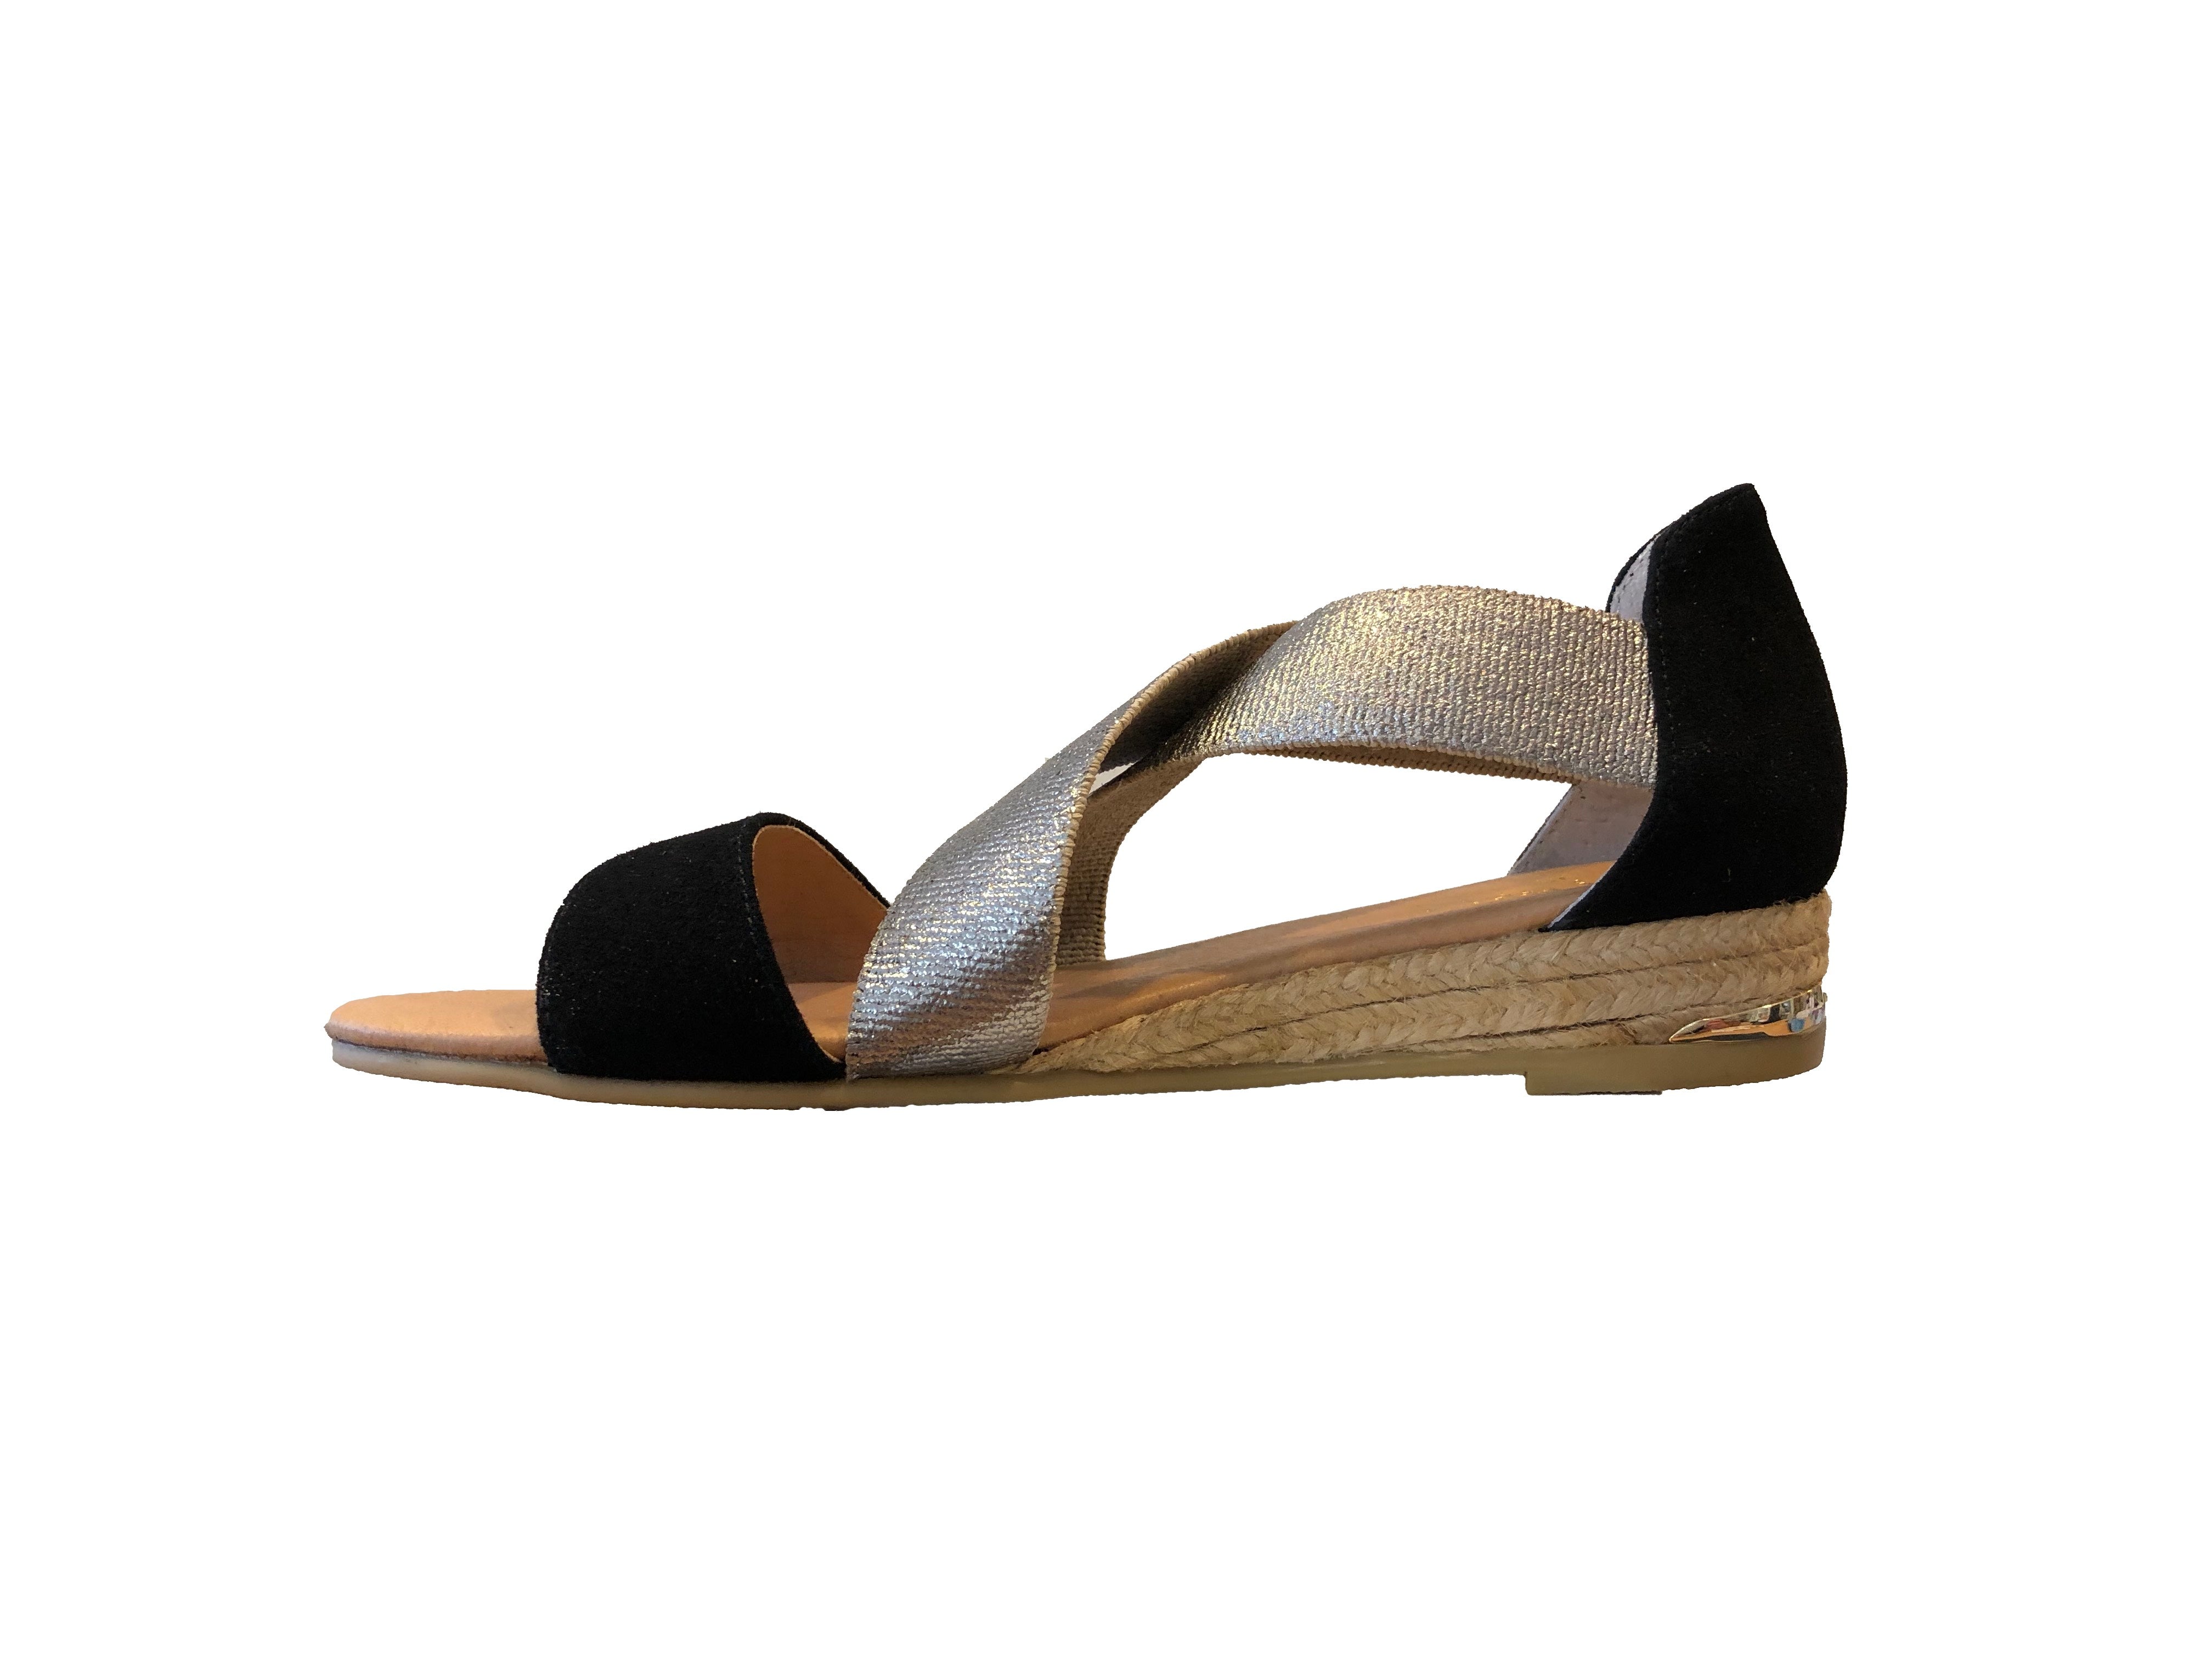 Pinaz 316 AO Black Suede & Silver Metallic Sandals - elevate your sole